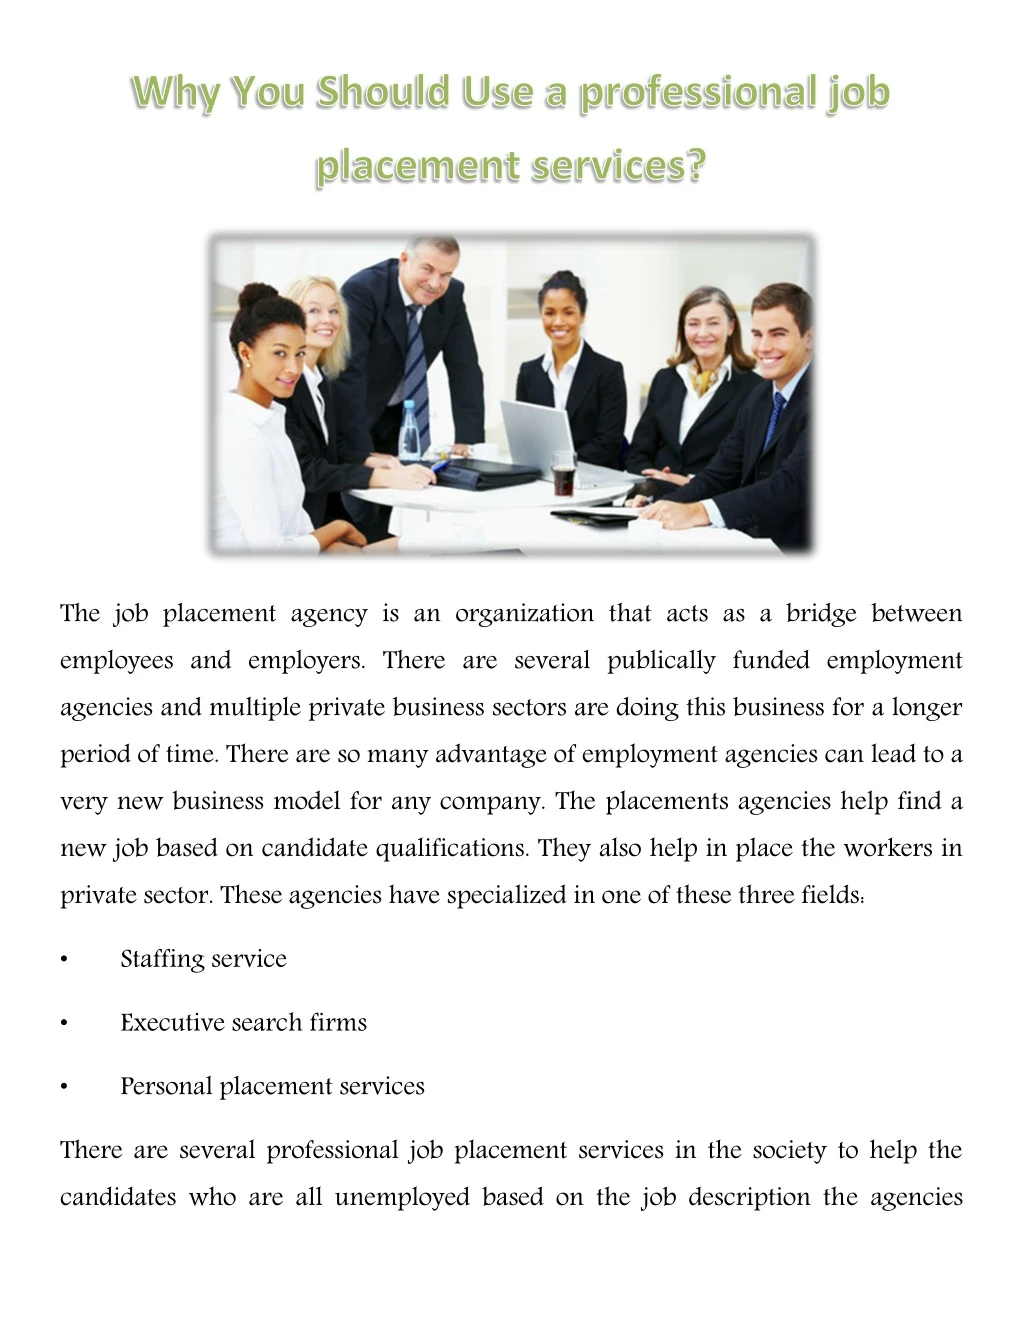 the job placement agency is an organization that